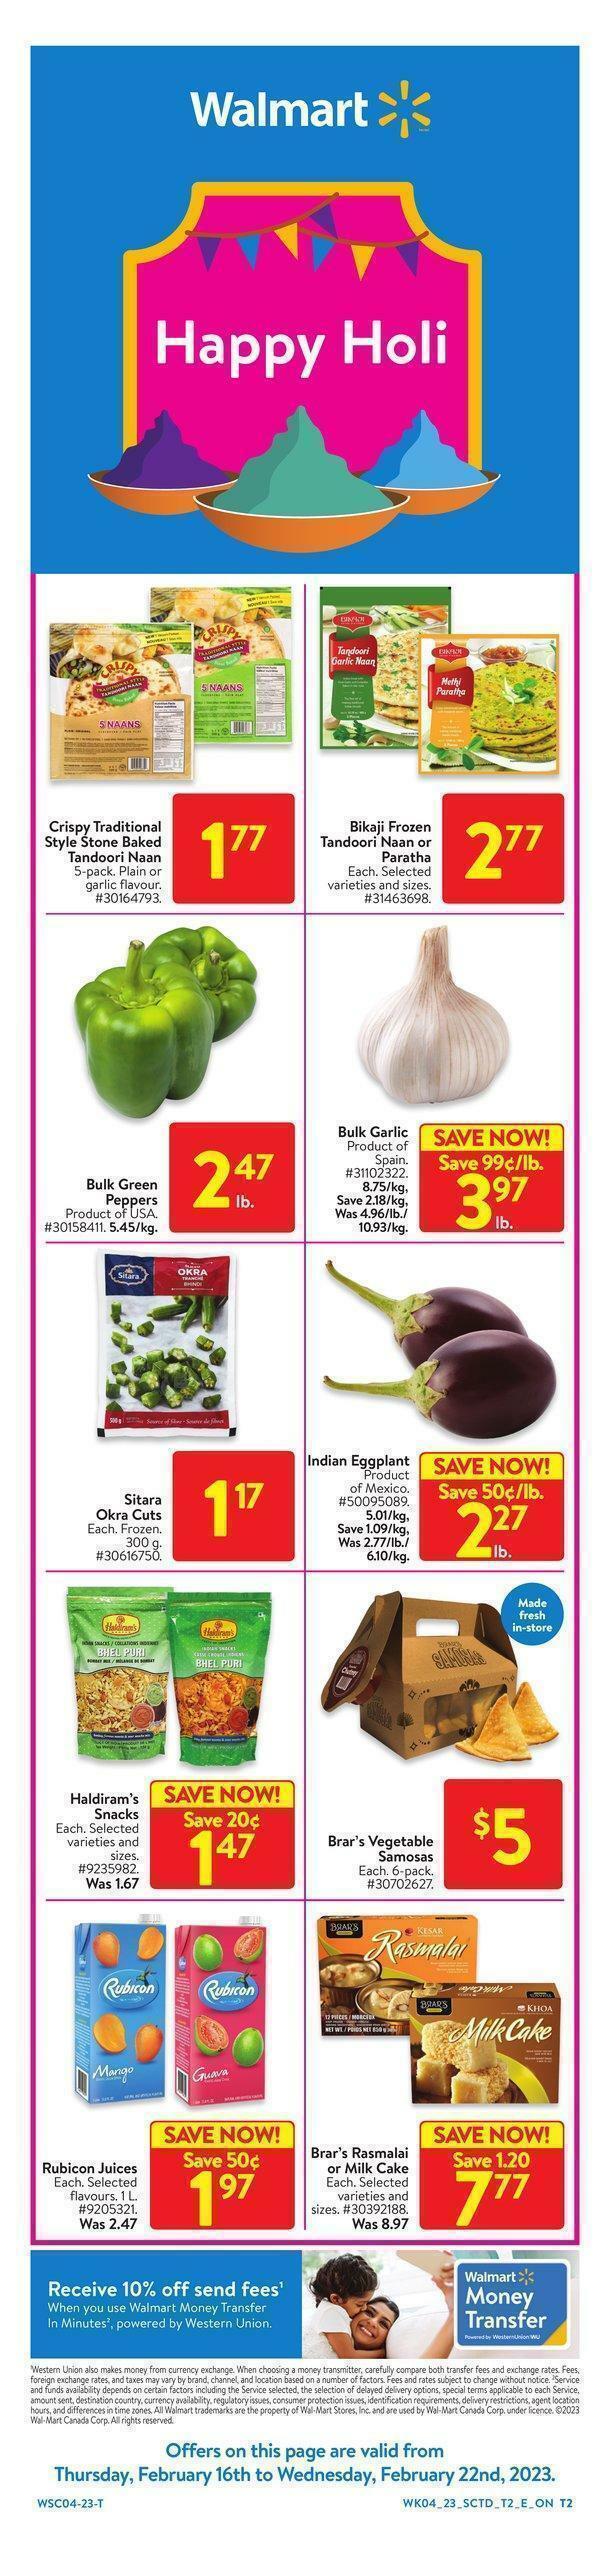 Walmart Flyer from March 2